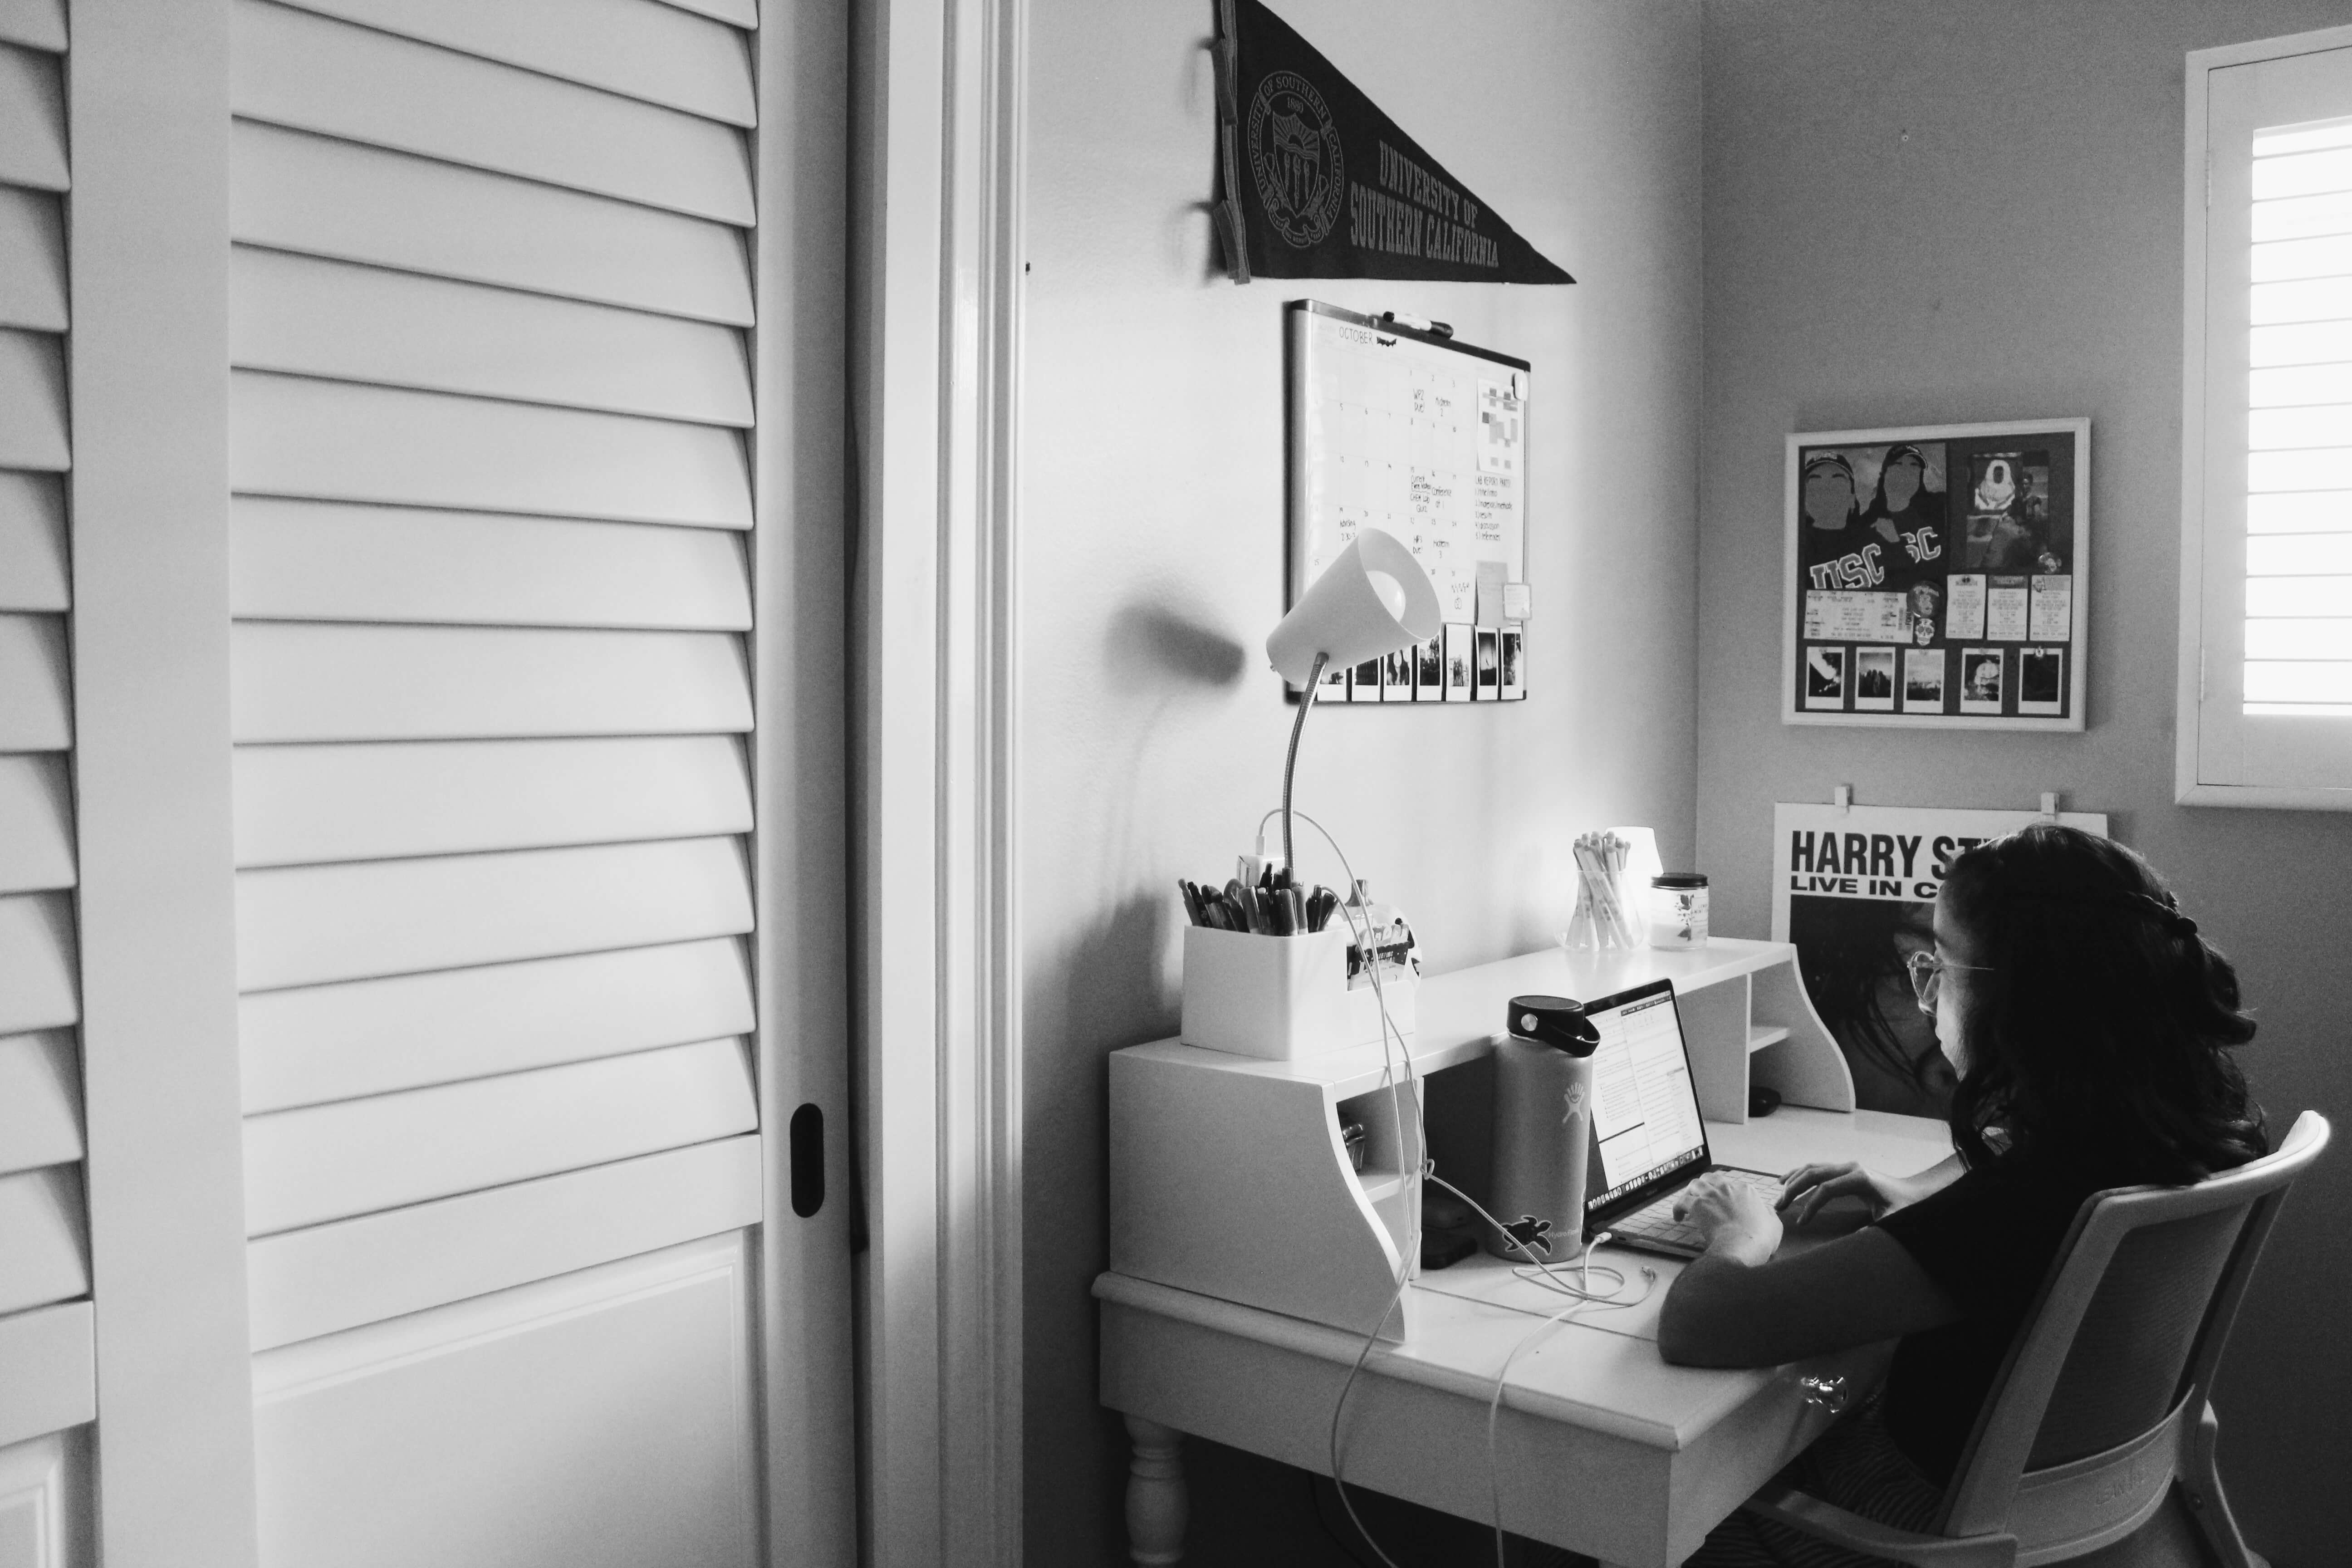 Black and white photo of a person studying in room